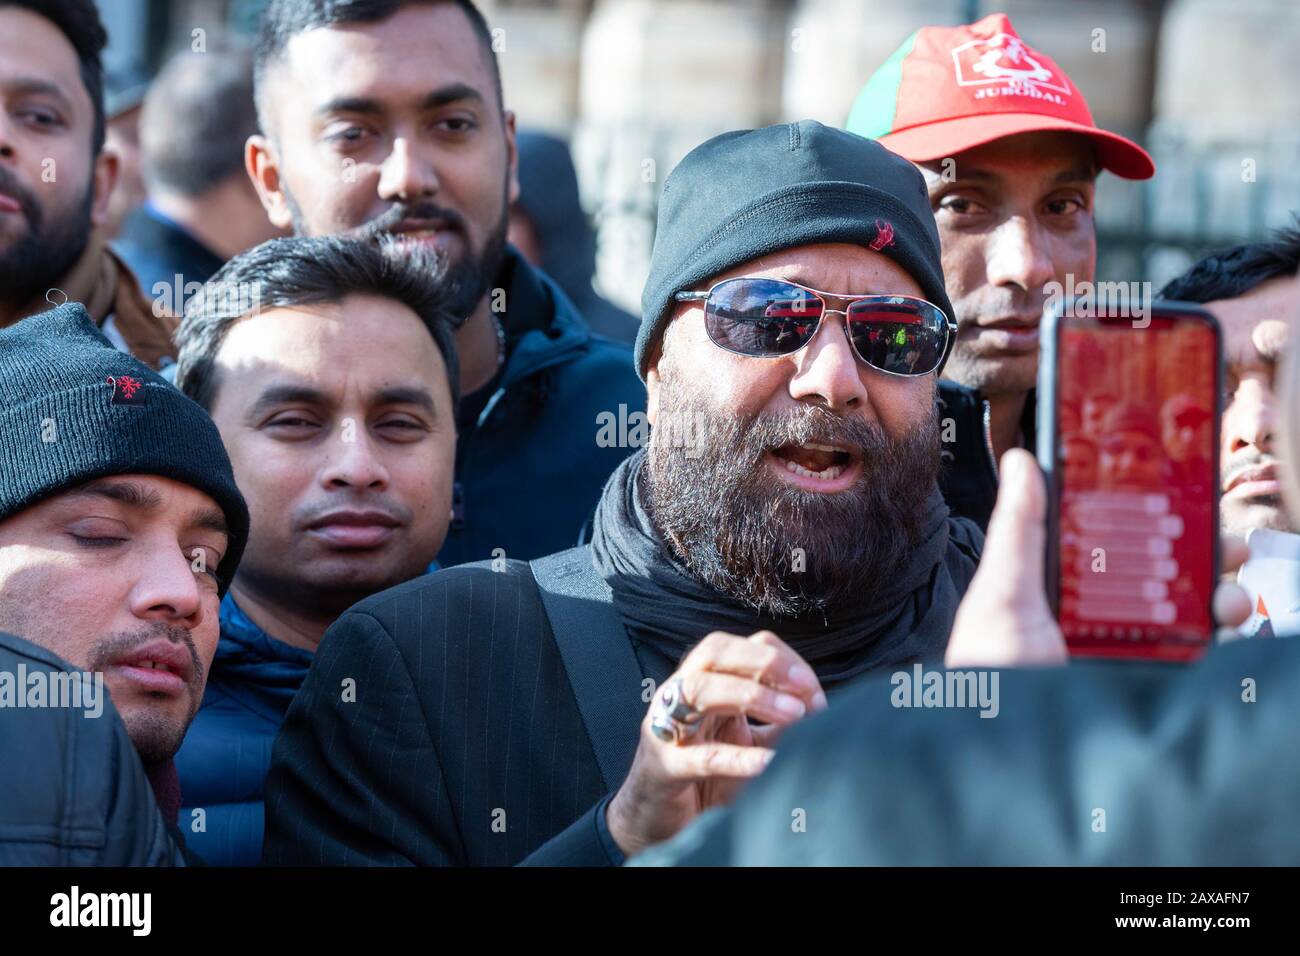 London, UK. 11th Feb, 2020. Members of the Bangladesh Nationalist Party attend a large and noisy protest opposite the Houses of Parliament to protest against the alleged illegal detention of party leaders in Bangladesh Credit: Ian Davidson/Alamy Live News Stock Photo